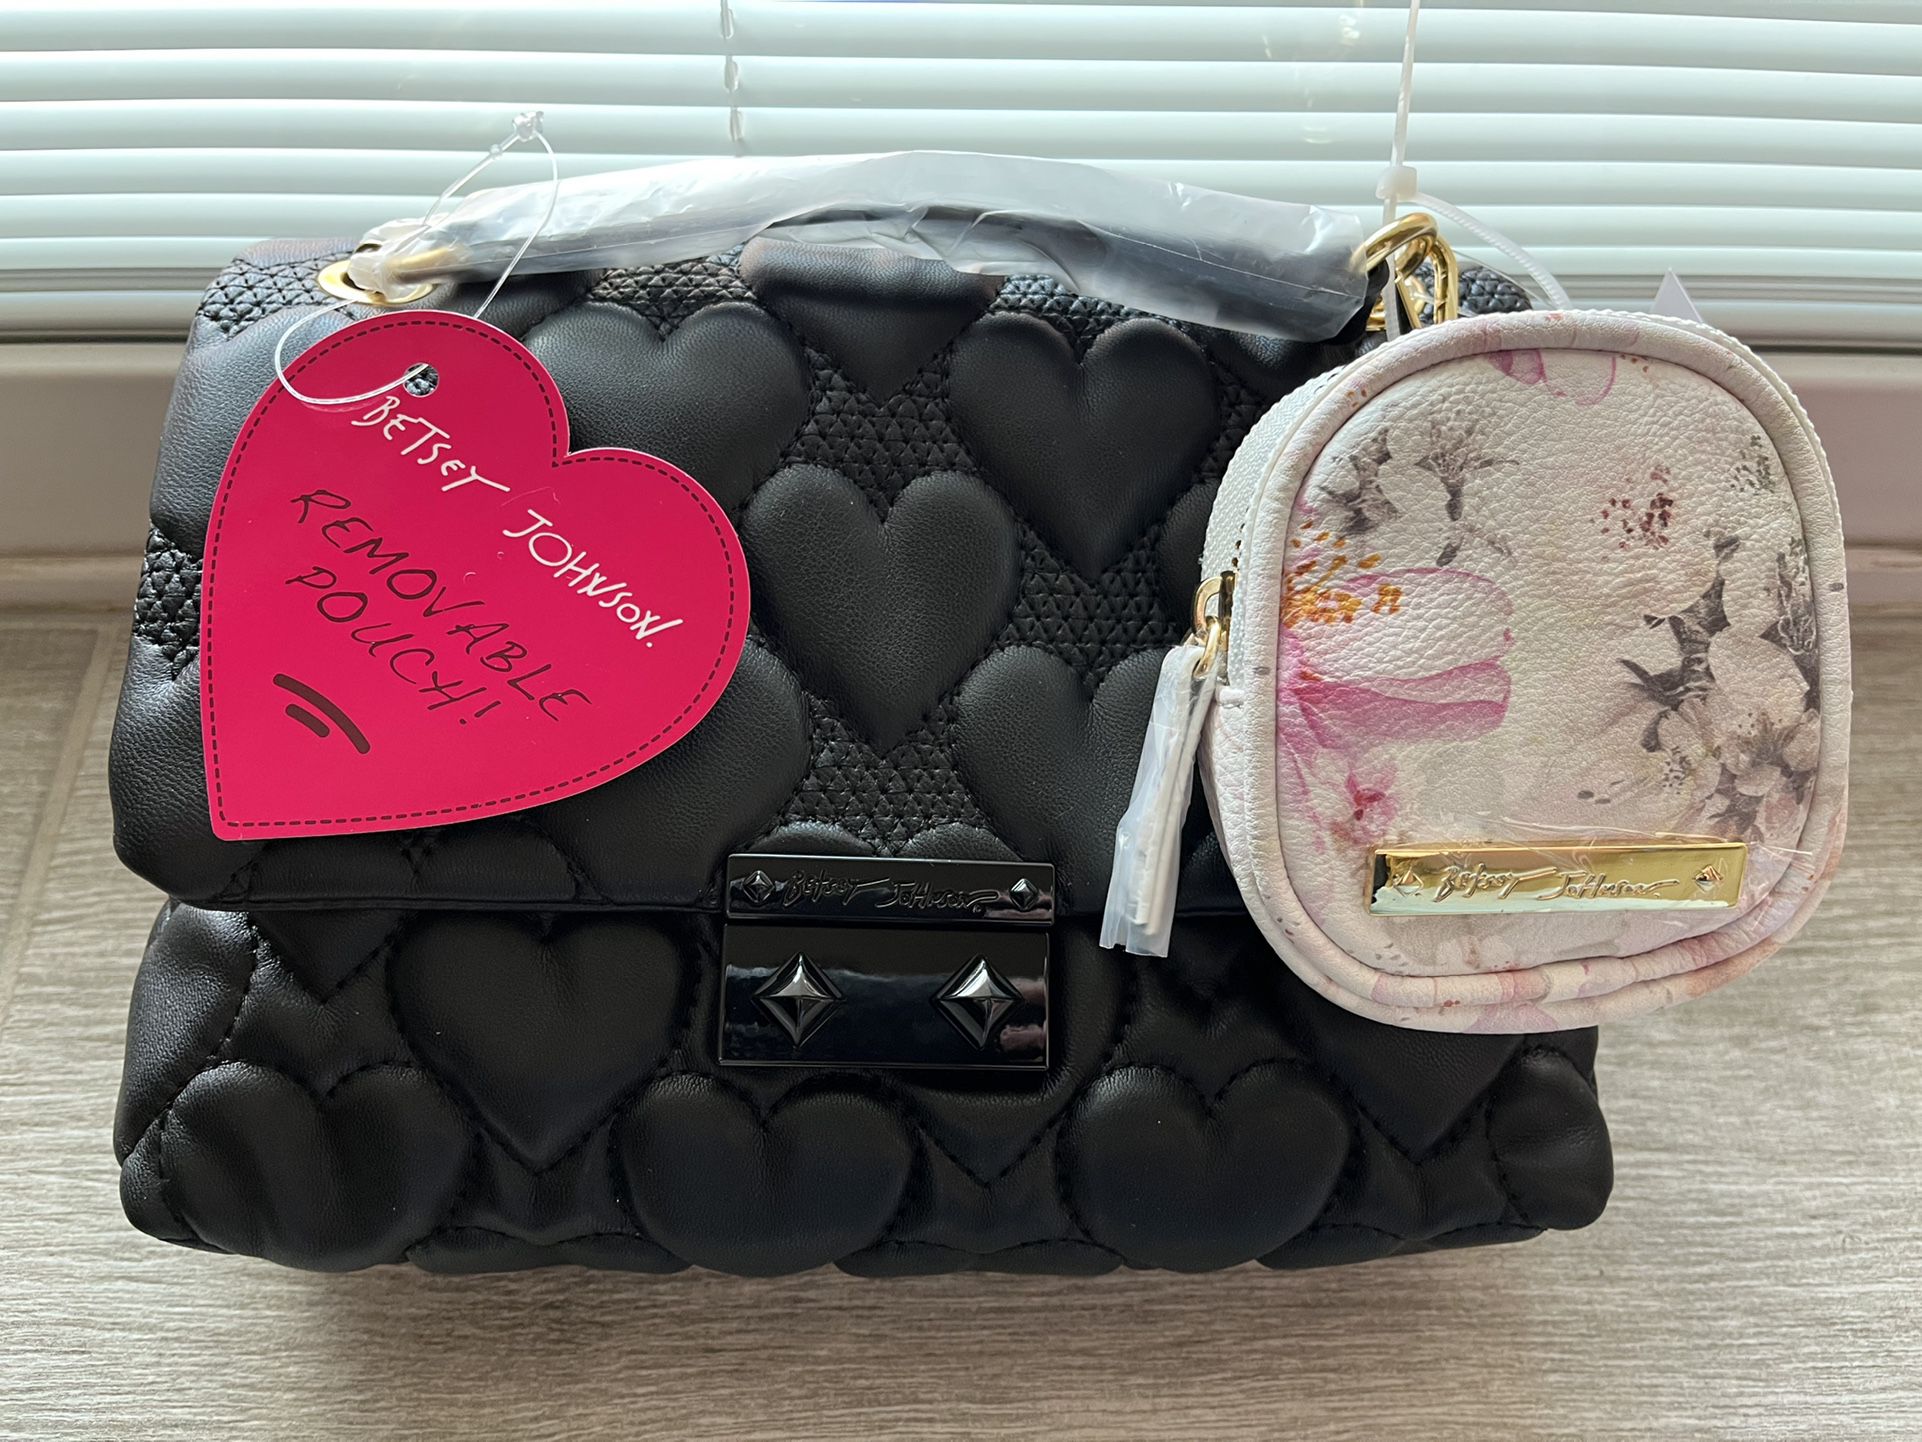 New Betsy Johnson Quilted Heart Convertible Purse